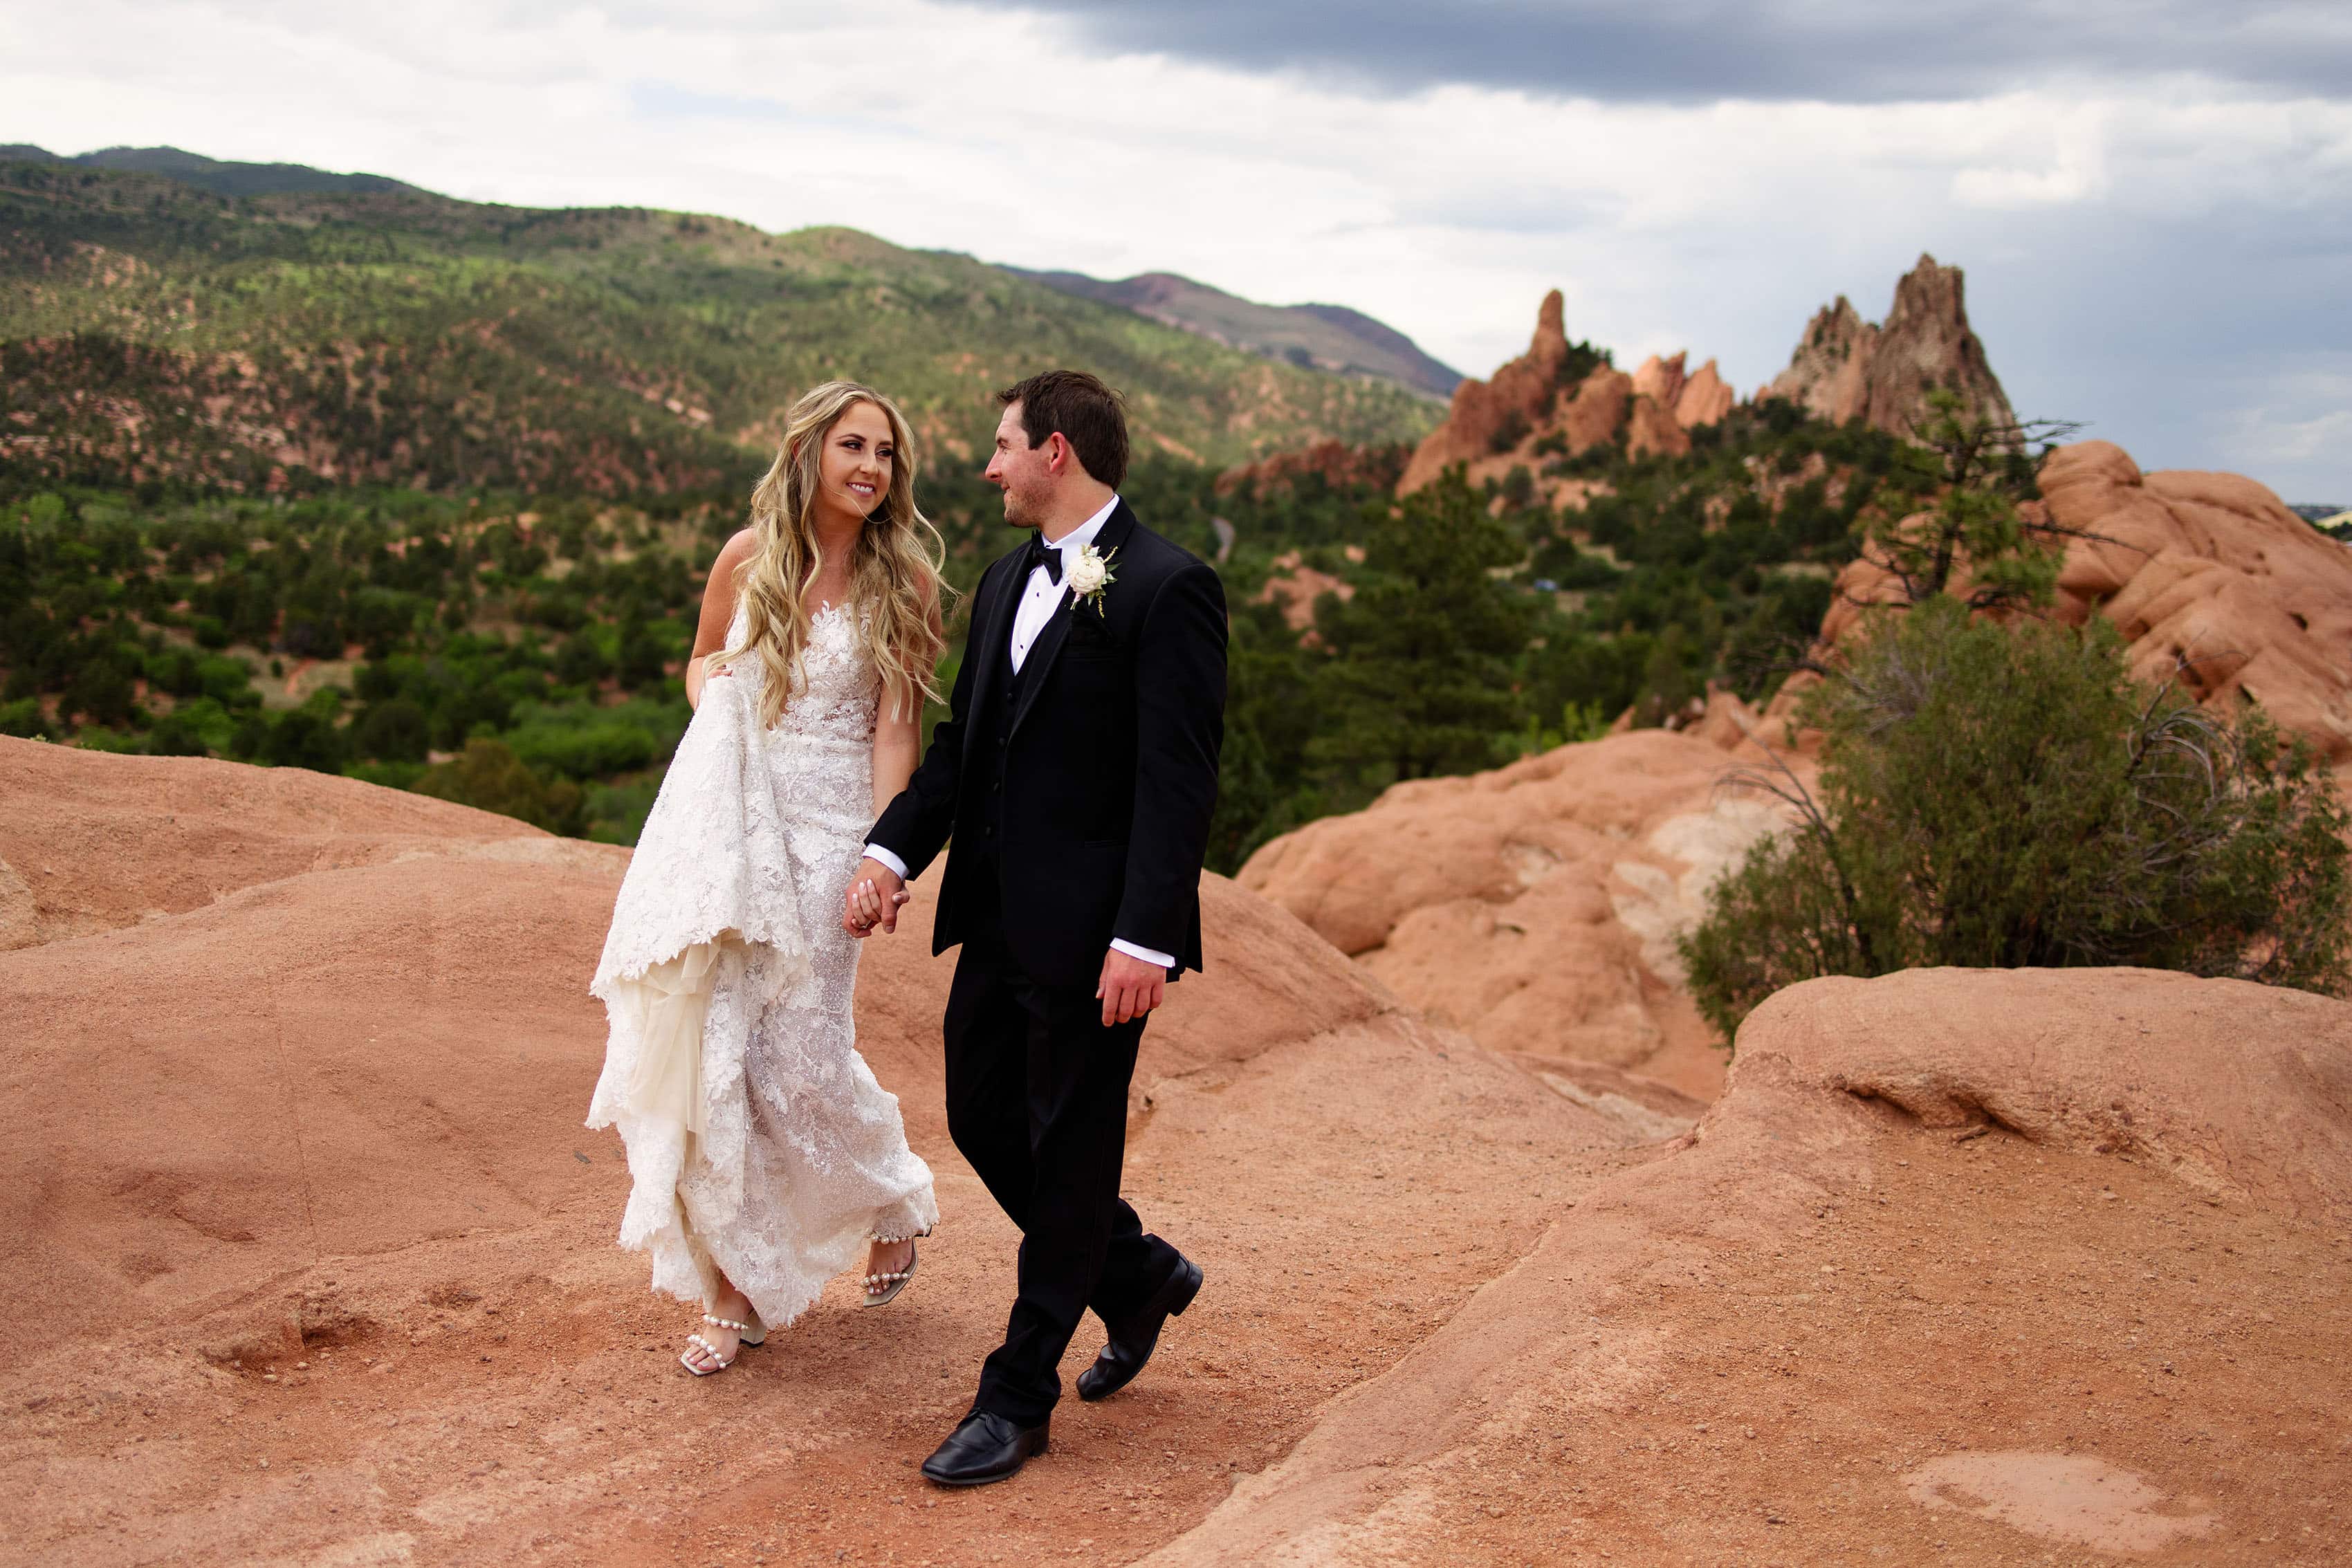 The bride and groom walk together in Garden of the Gods Park